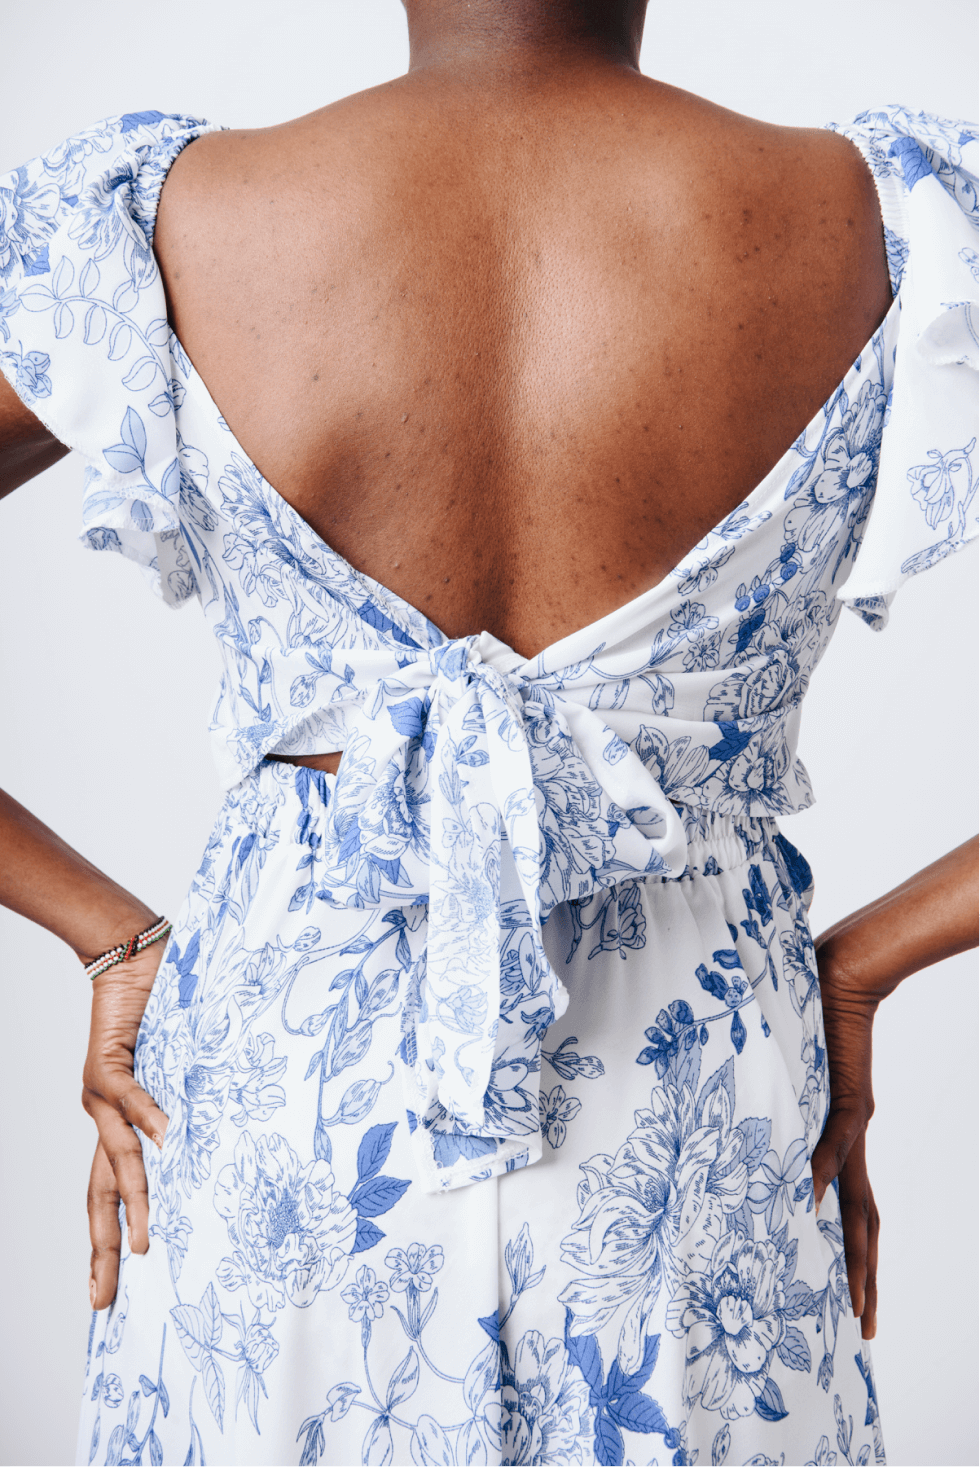 Shop Bahari White & Blue Floral Maxi Dress by Cyami Custom Fit on Arrai. Discover stylish, affordable clothing, jewelry, handbags and unique handmade pieces from top Kenyan & African fashion brands prioritising sustainability and quality craftsmanship.